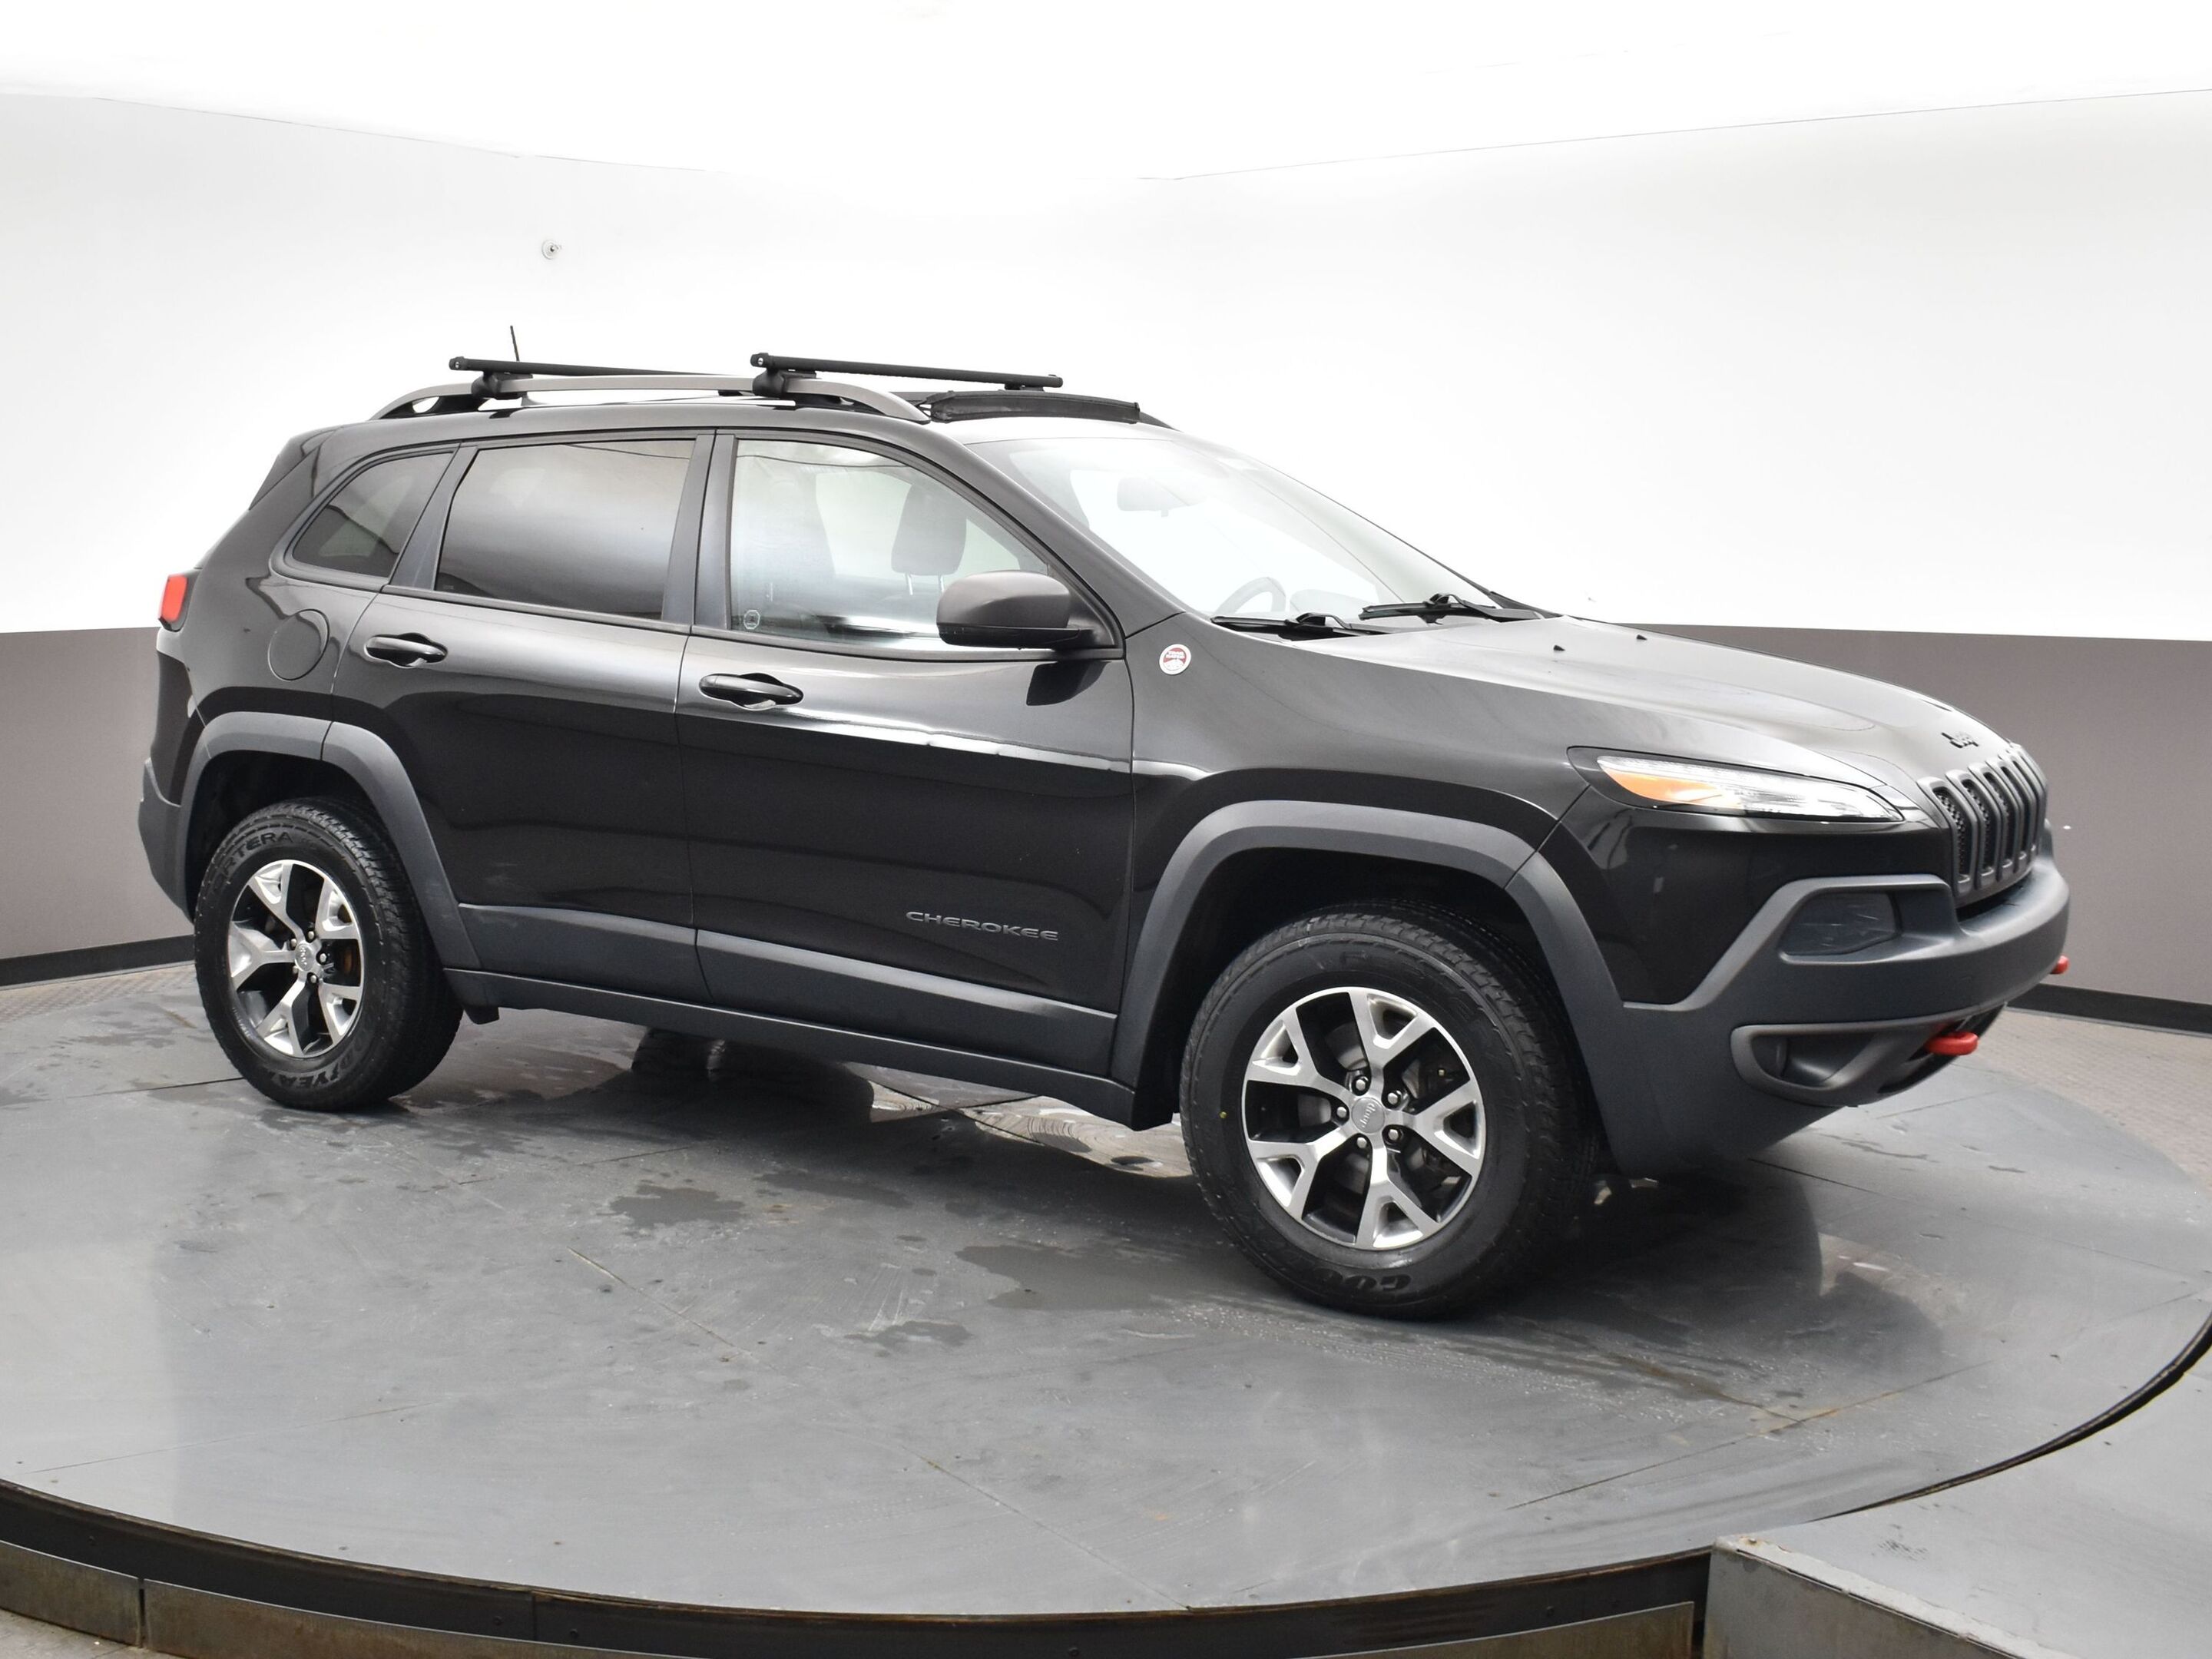 2016 Jeep Cherokee TRAIL RATED 4X4 BOOK YOUR TEST DRIVE TODAY! 902-46